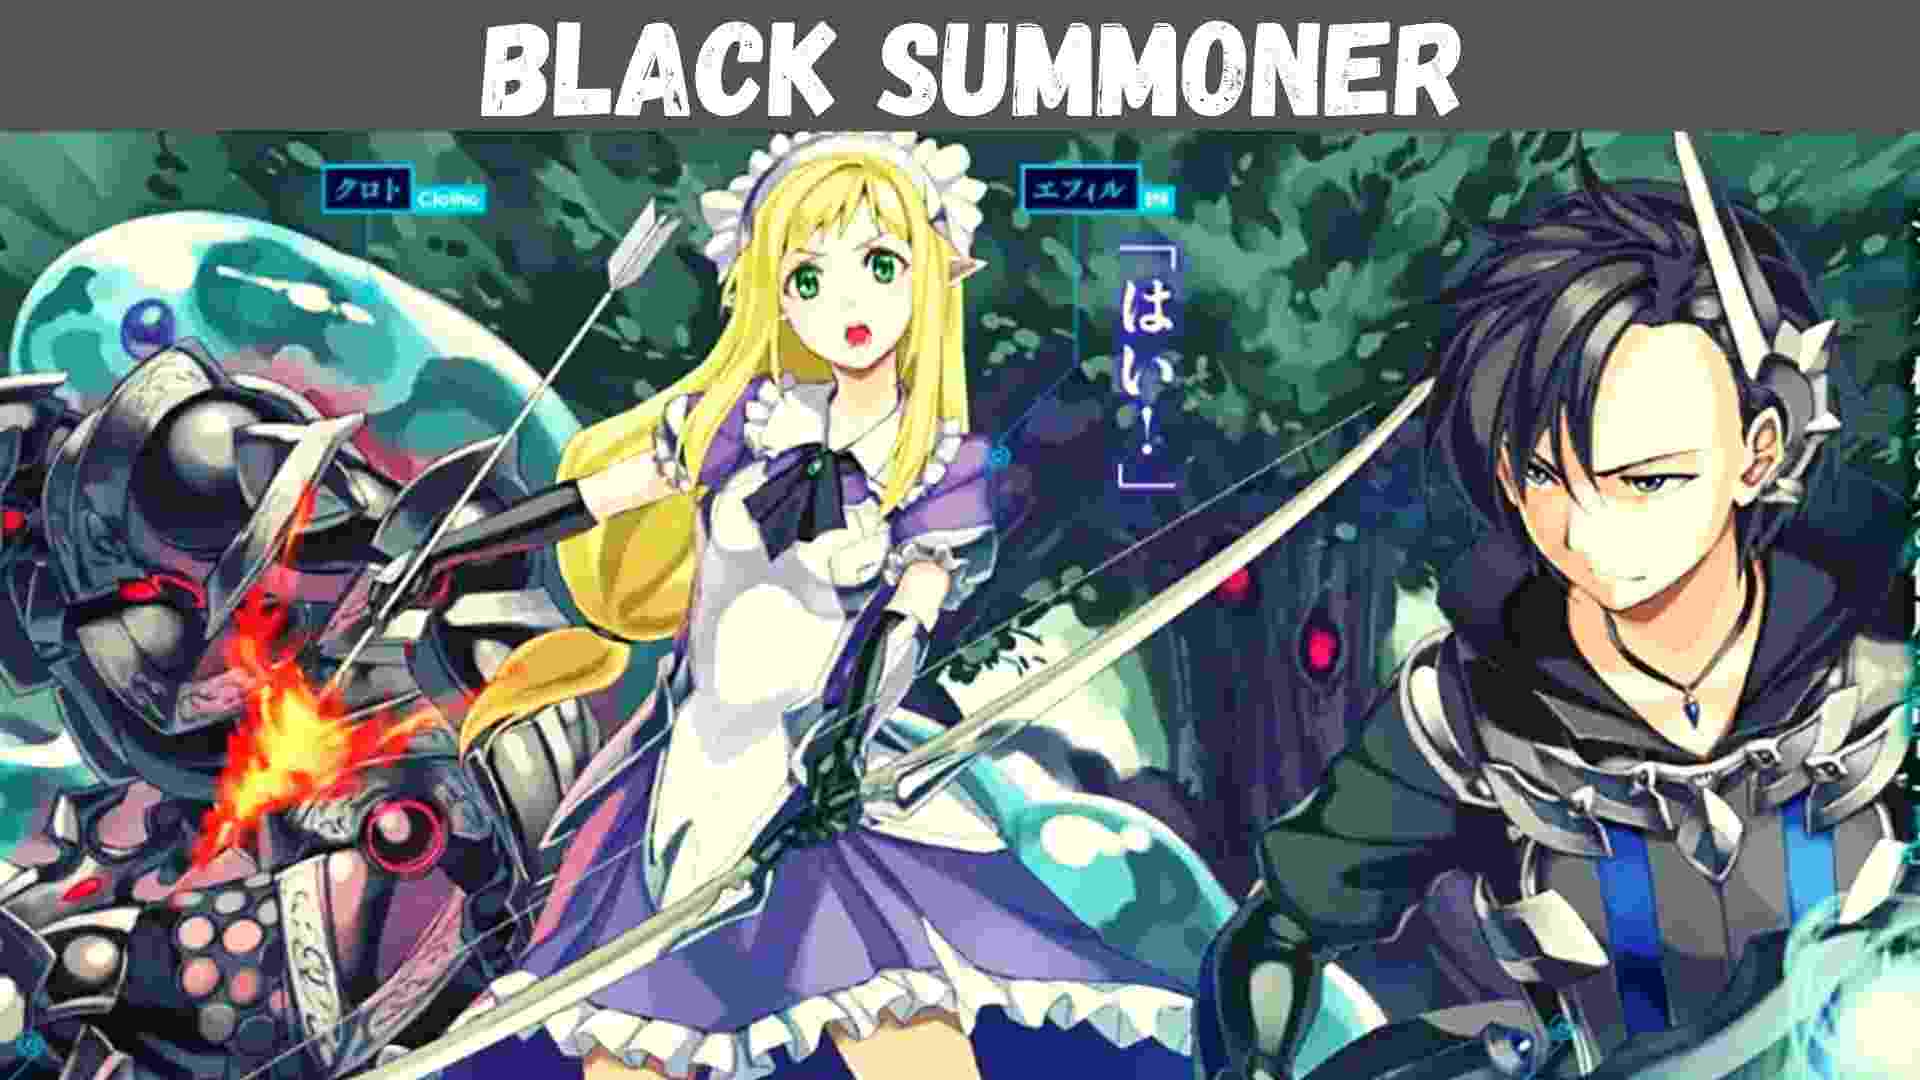 Black Summoner Parents guide and Age Rating